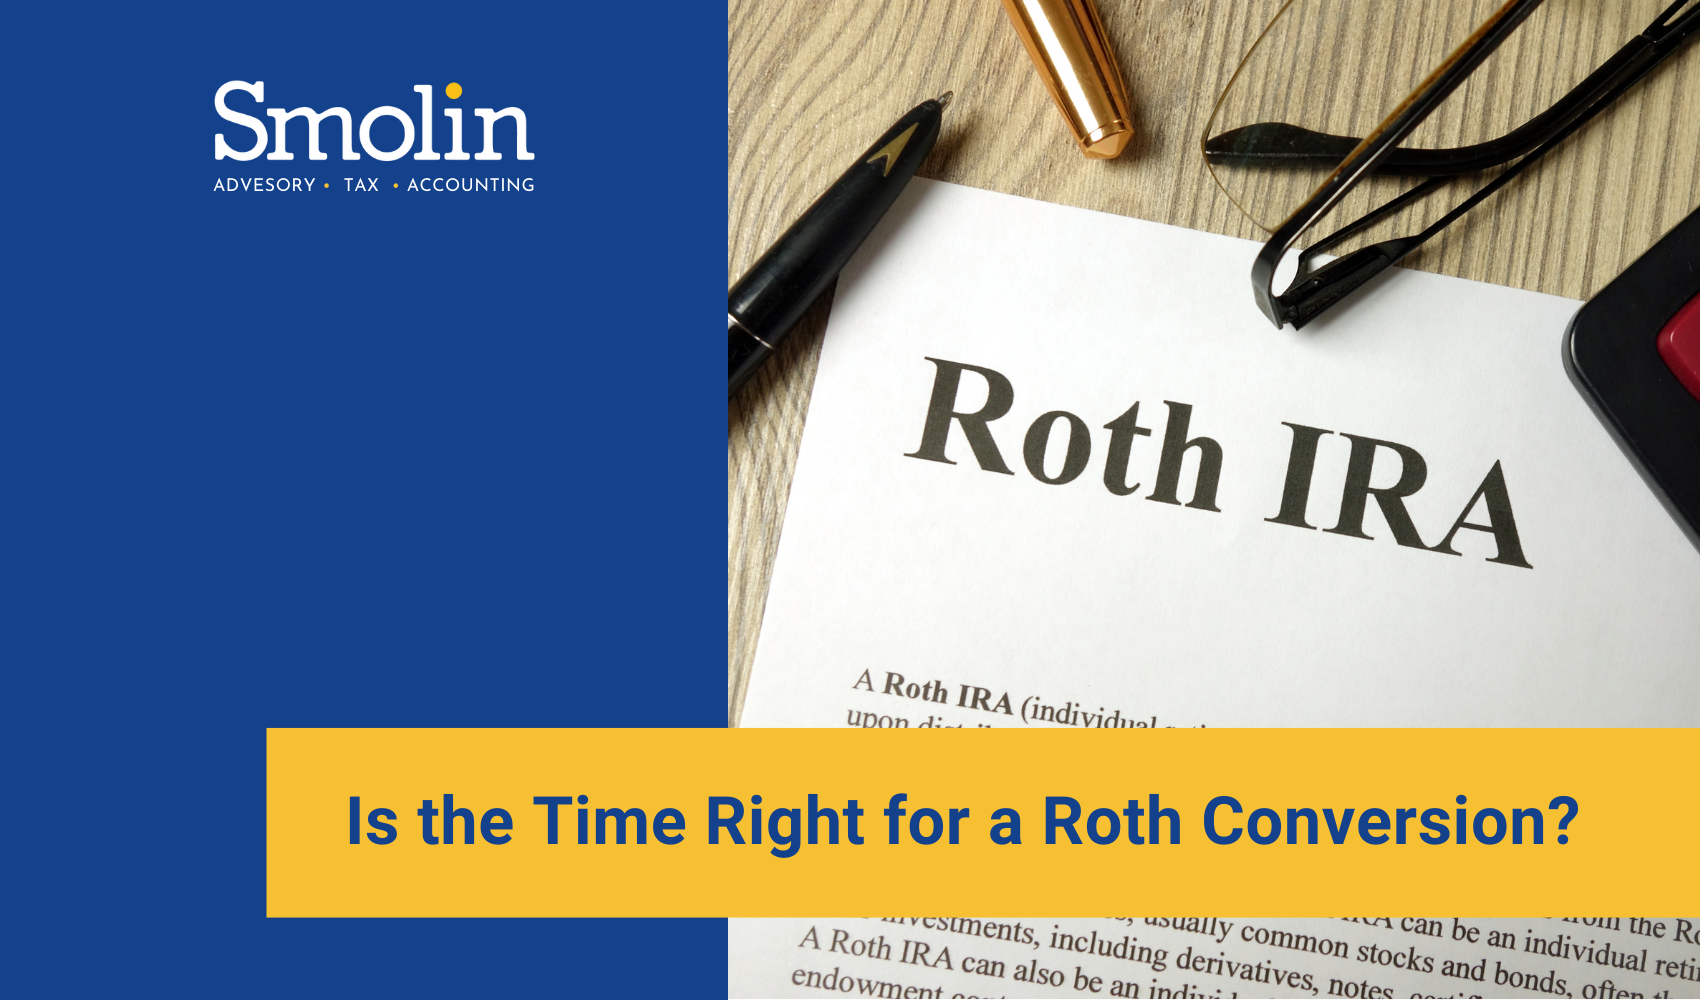 Is the Time Right for a Roth Conversion?